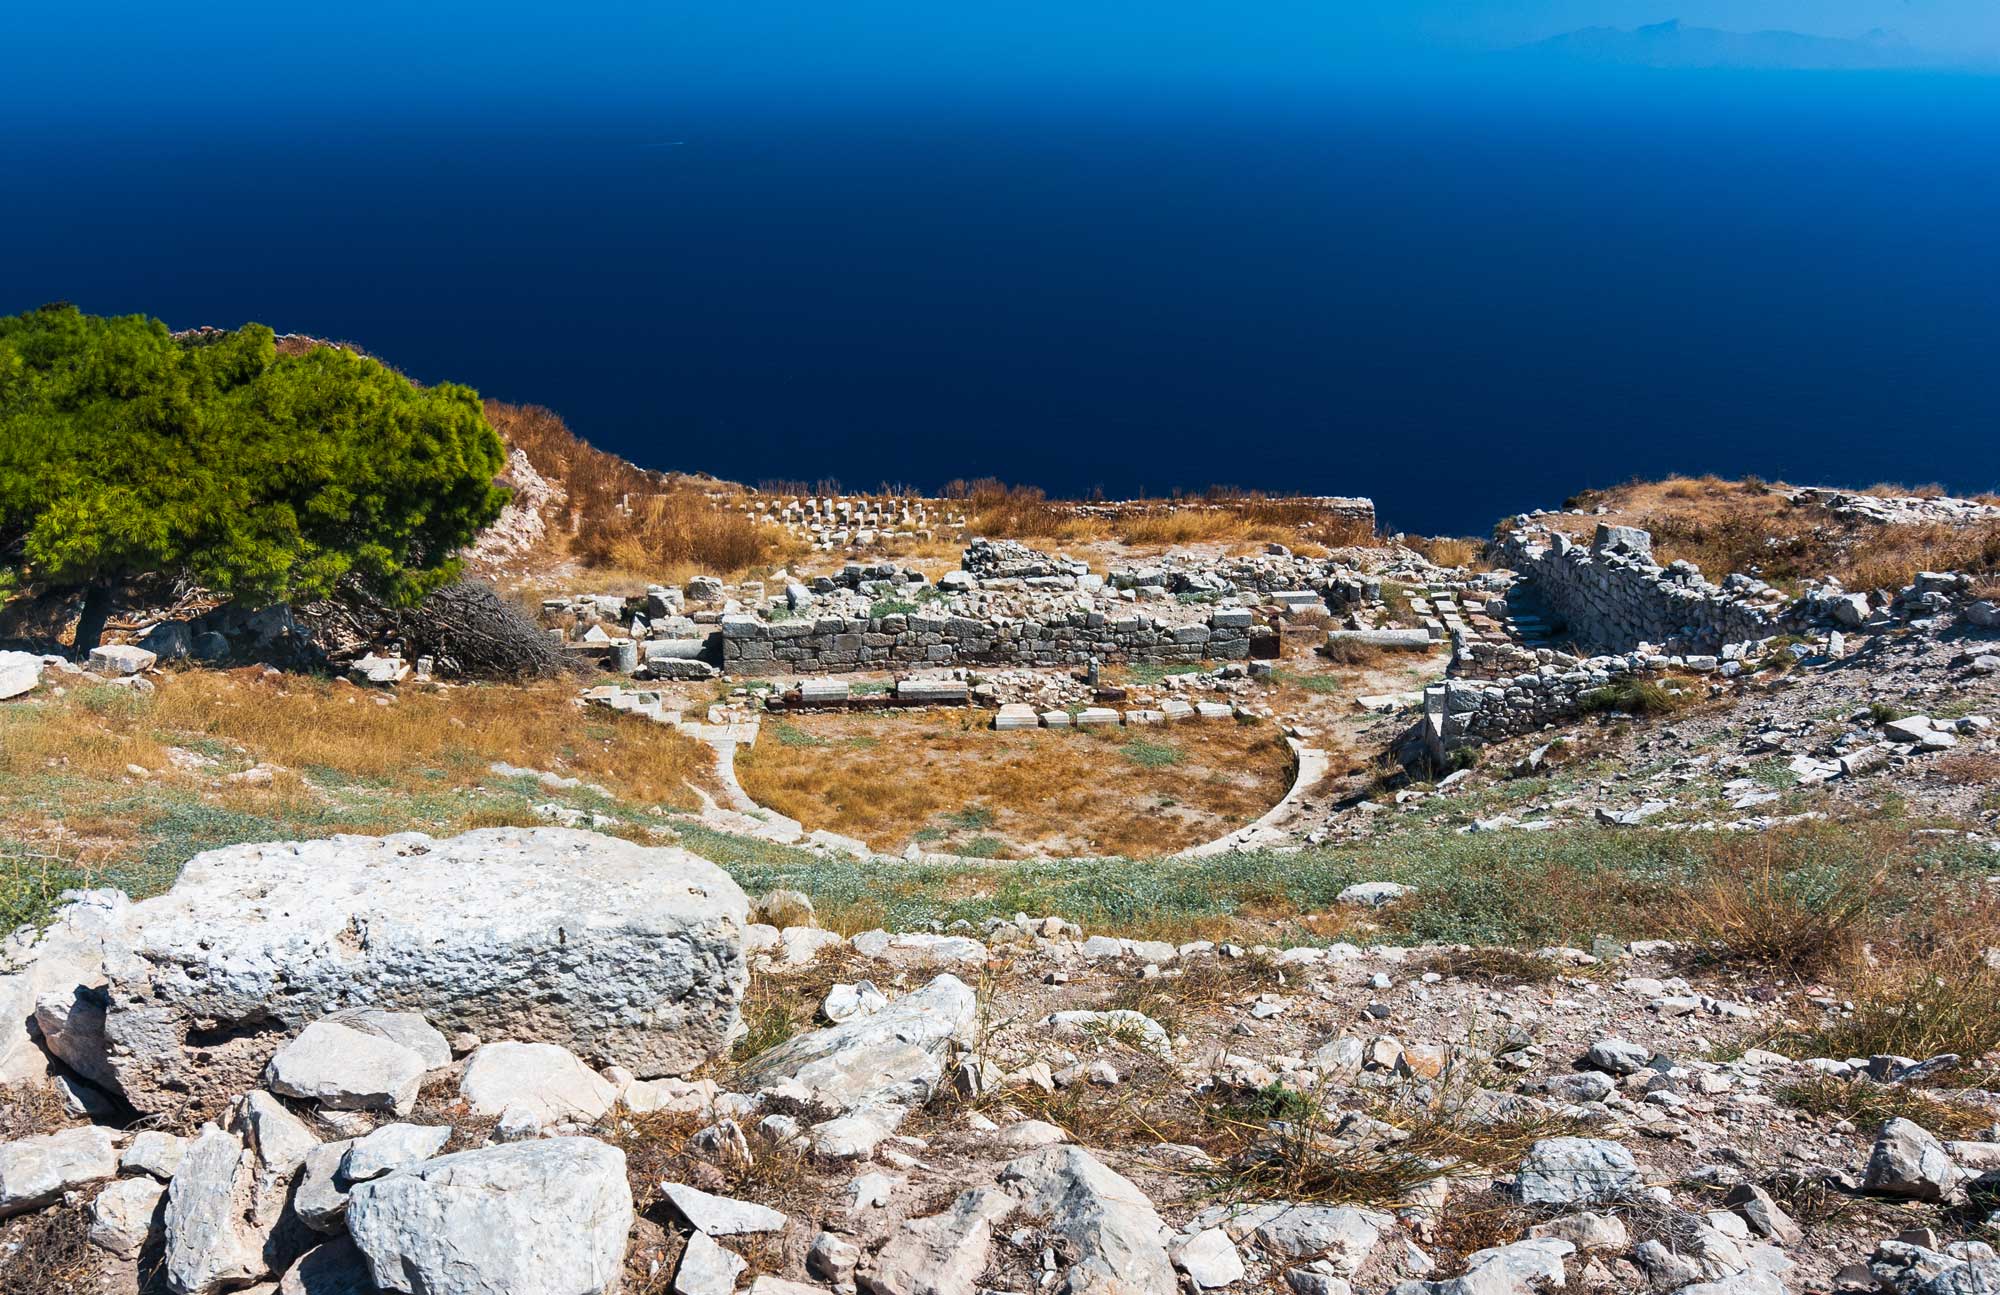 KT (3 hours): [Santorini] Ancient Thira, archaeological site on top of Mesa Vouno Mountain